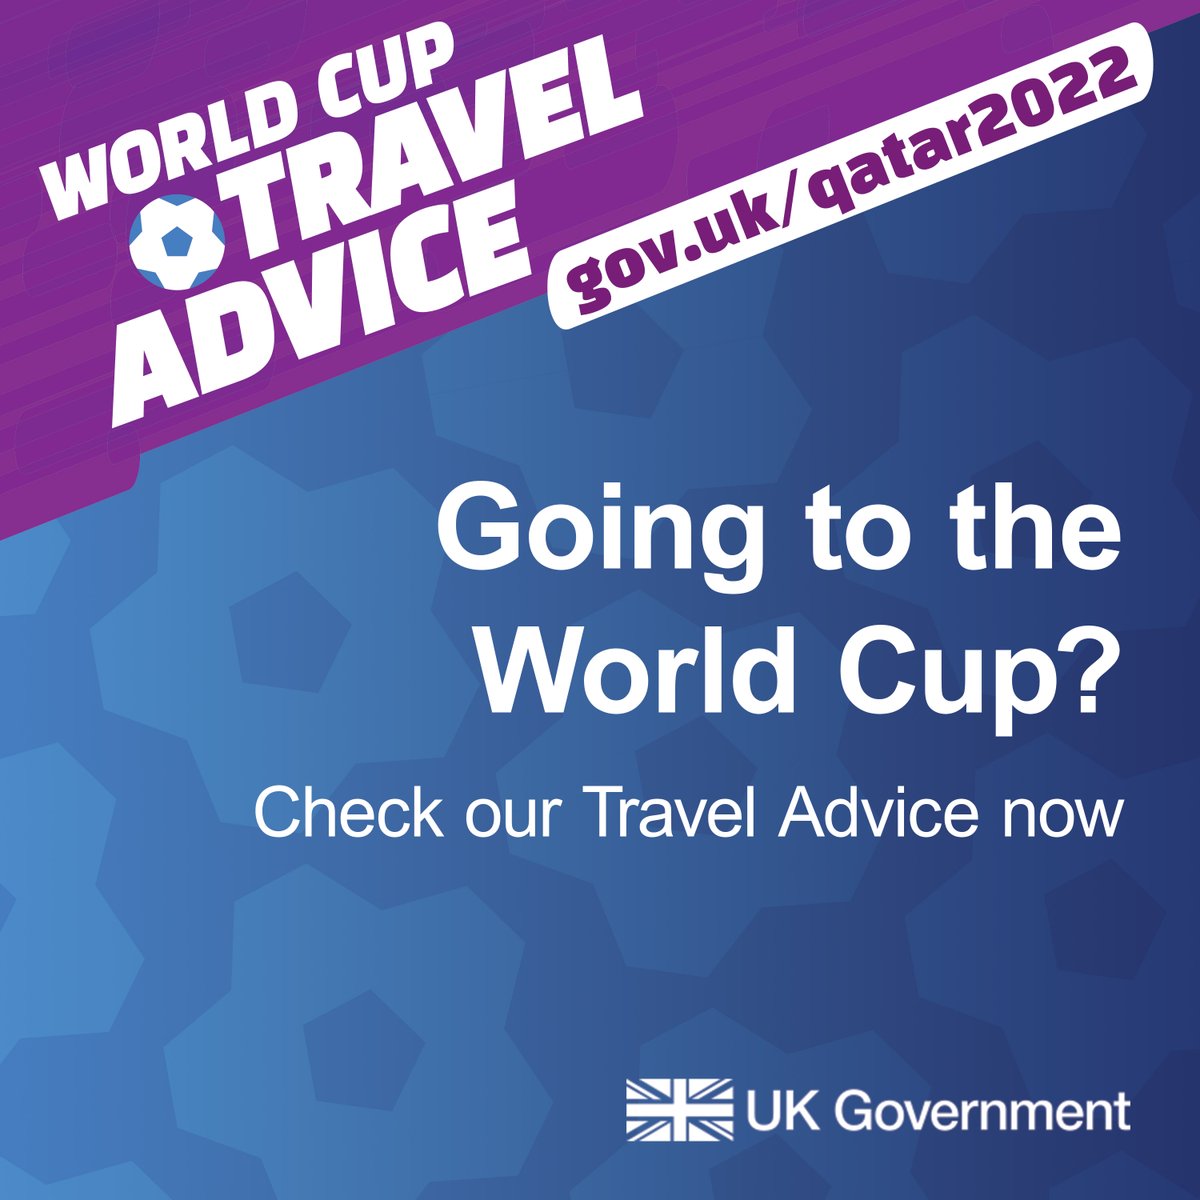 Qatar’s Covid-19 entry requirements have changed – from 1 November, you no longer need a negative test result to enter the country 🇶🇦. To receive automatic updates on changes like this, sign up to email alerts on our World Cup travel advice: ow.ly/F95750LpIXw